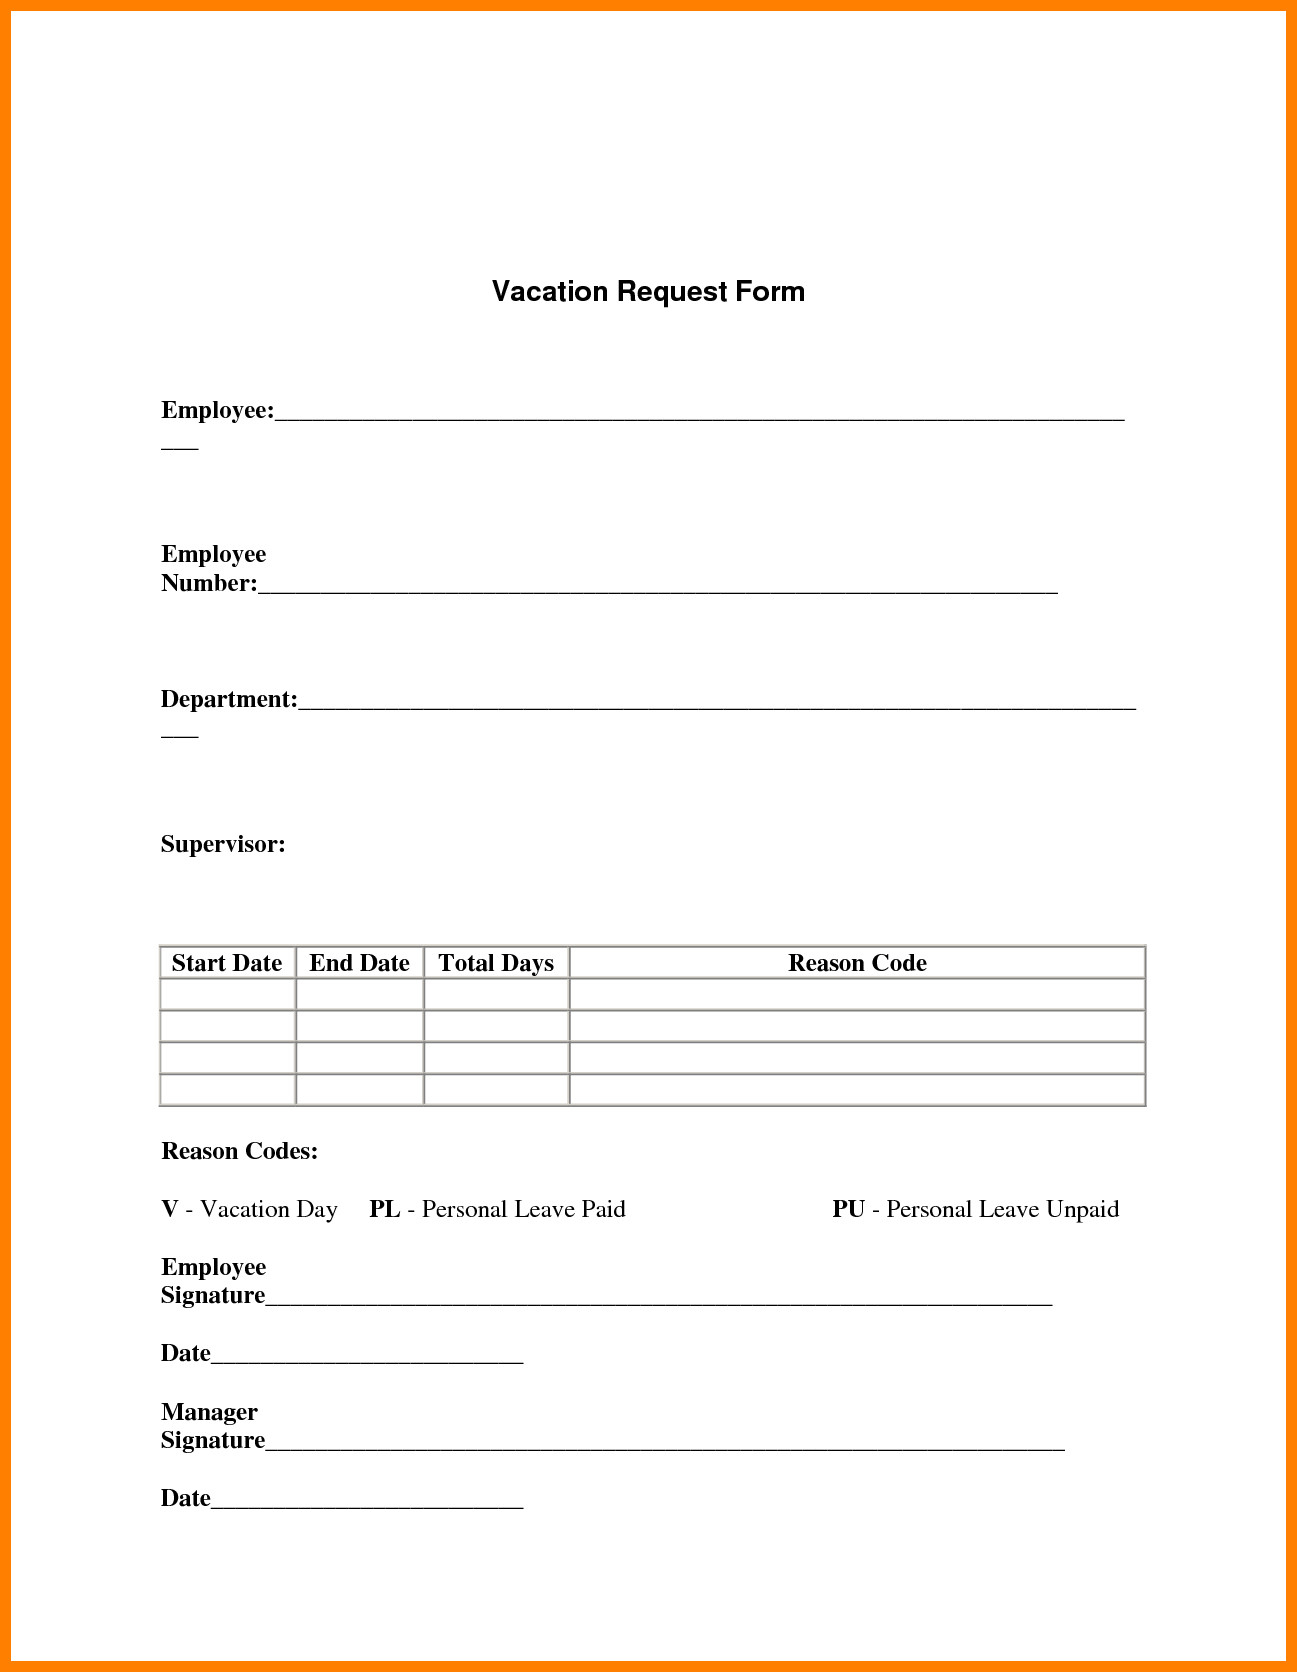 Travel Request Form Template Word – Atlantaauctionco Intended For Travel Request Form Template Word